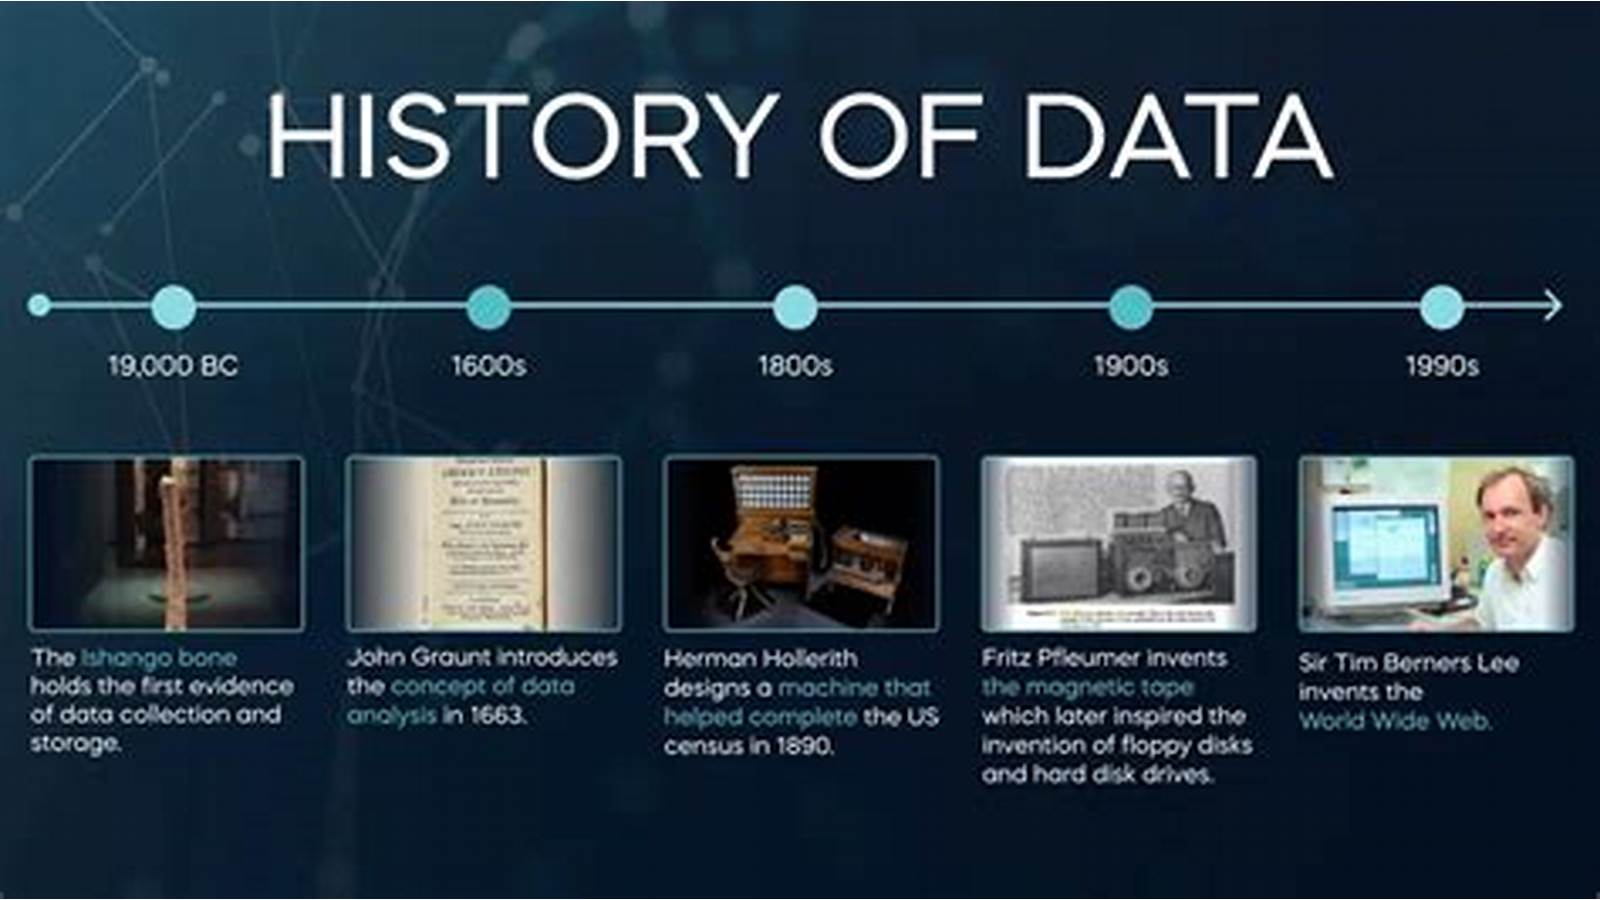 Access to Historical Data Image